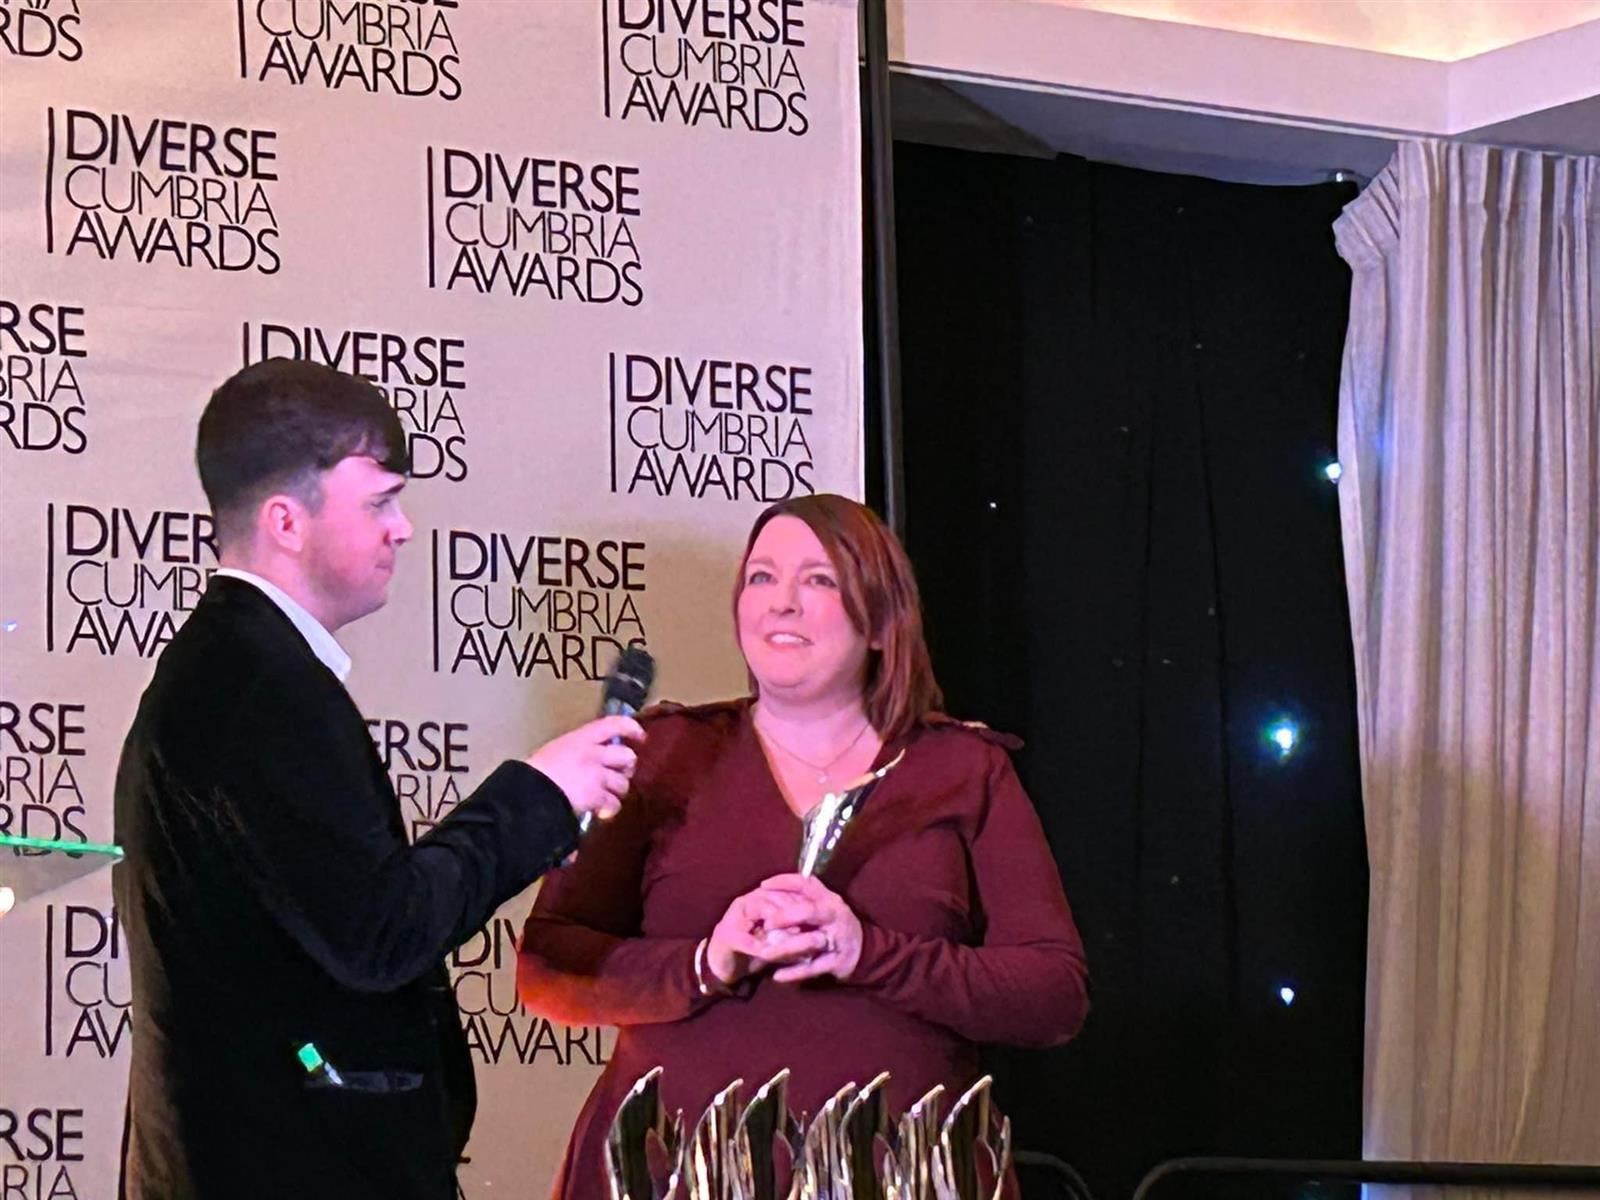 Morton Academy Wins Diversity Event of the Year at Diverse Cumbria Awards